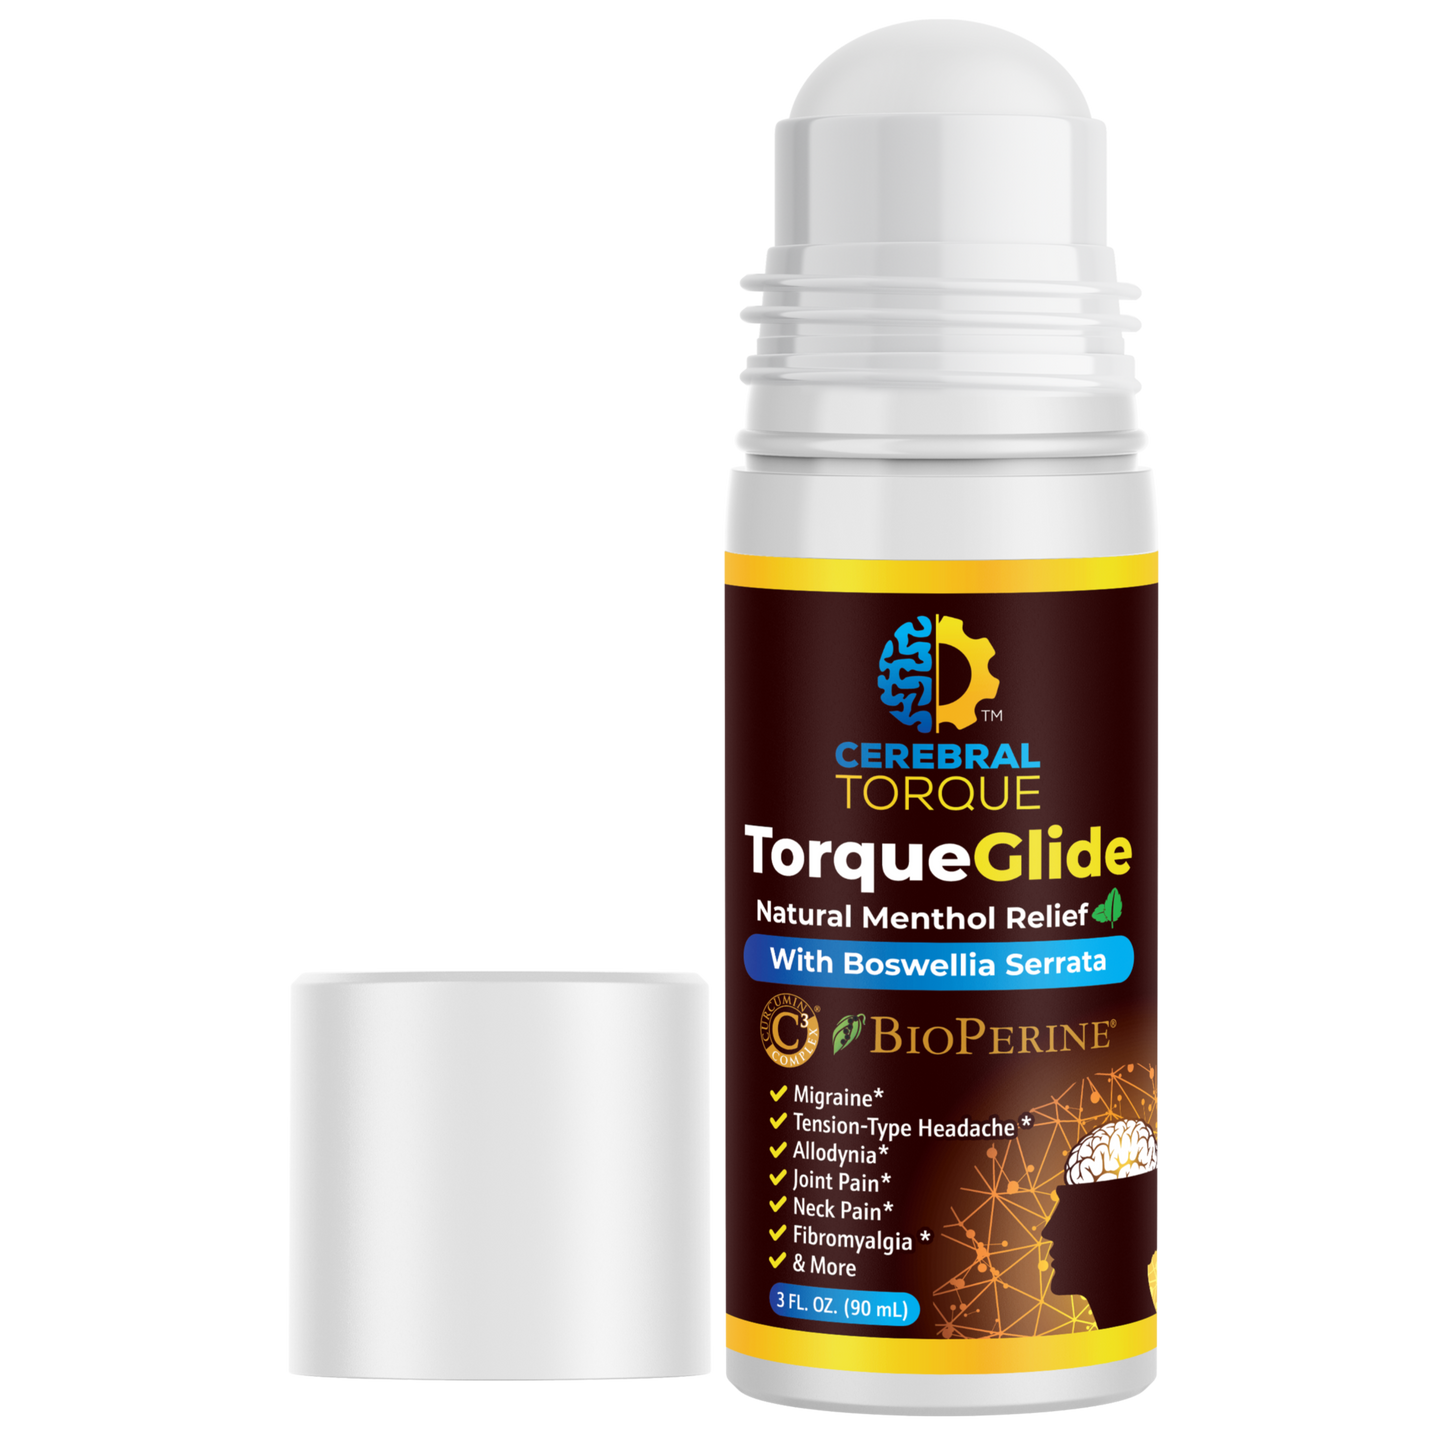 TorqueGlide | Topical solution for migraine support and pain relief